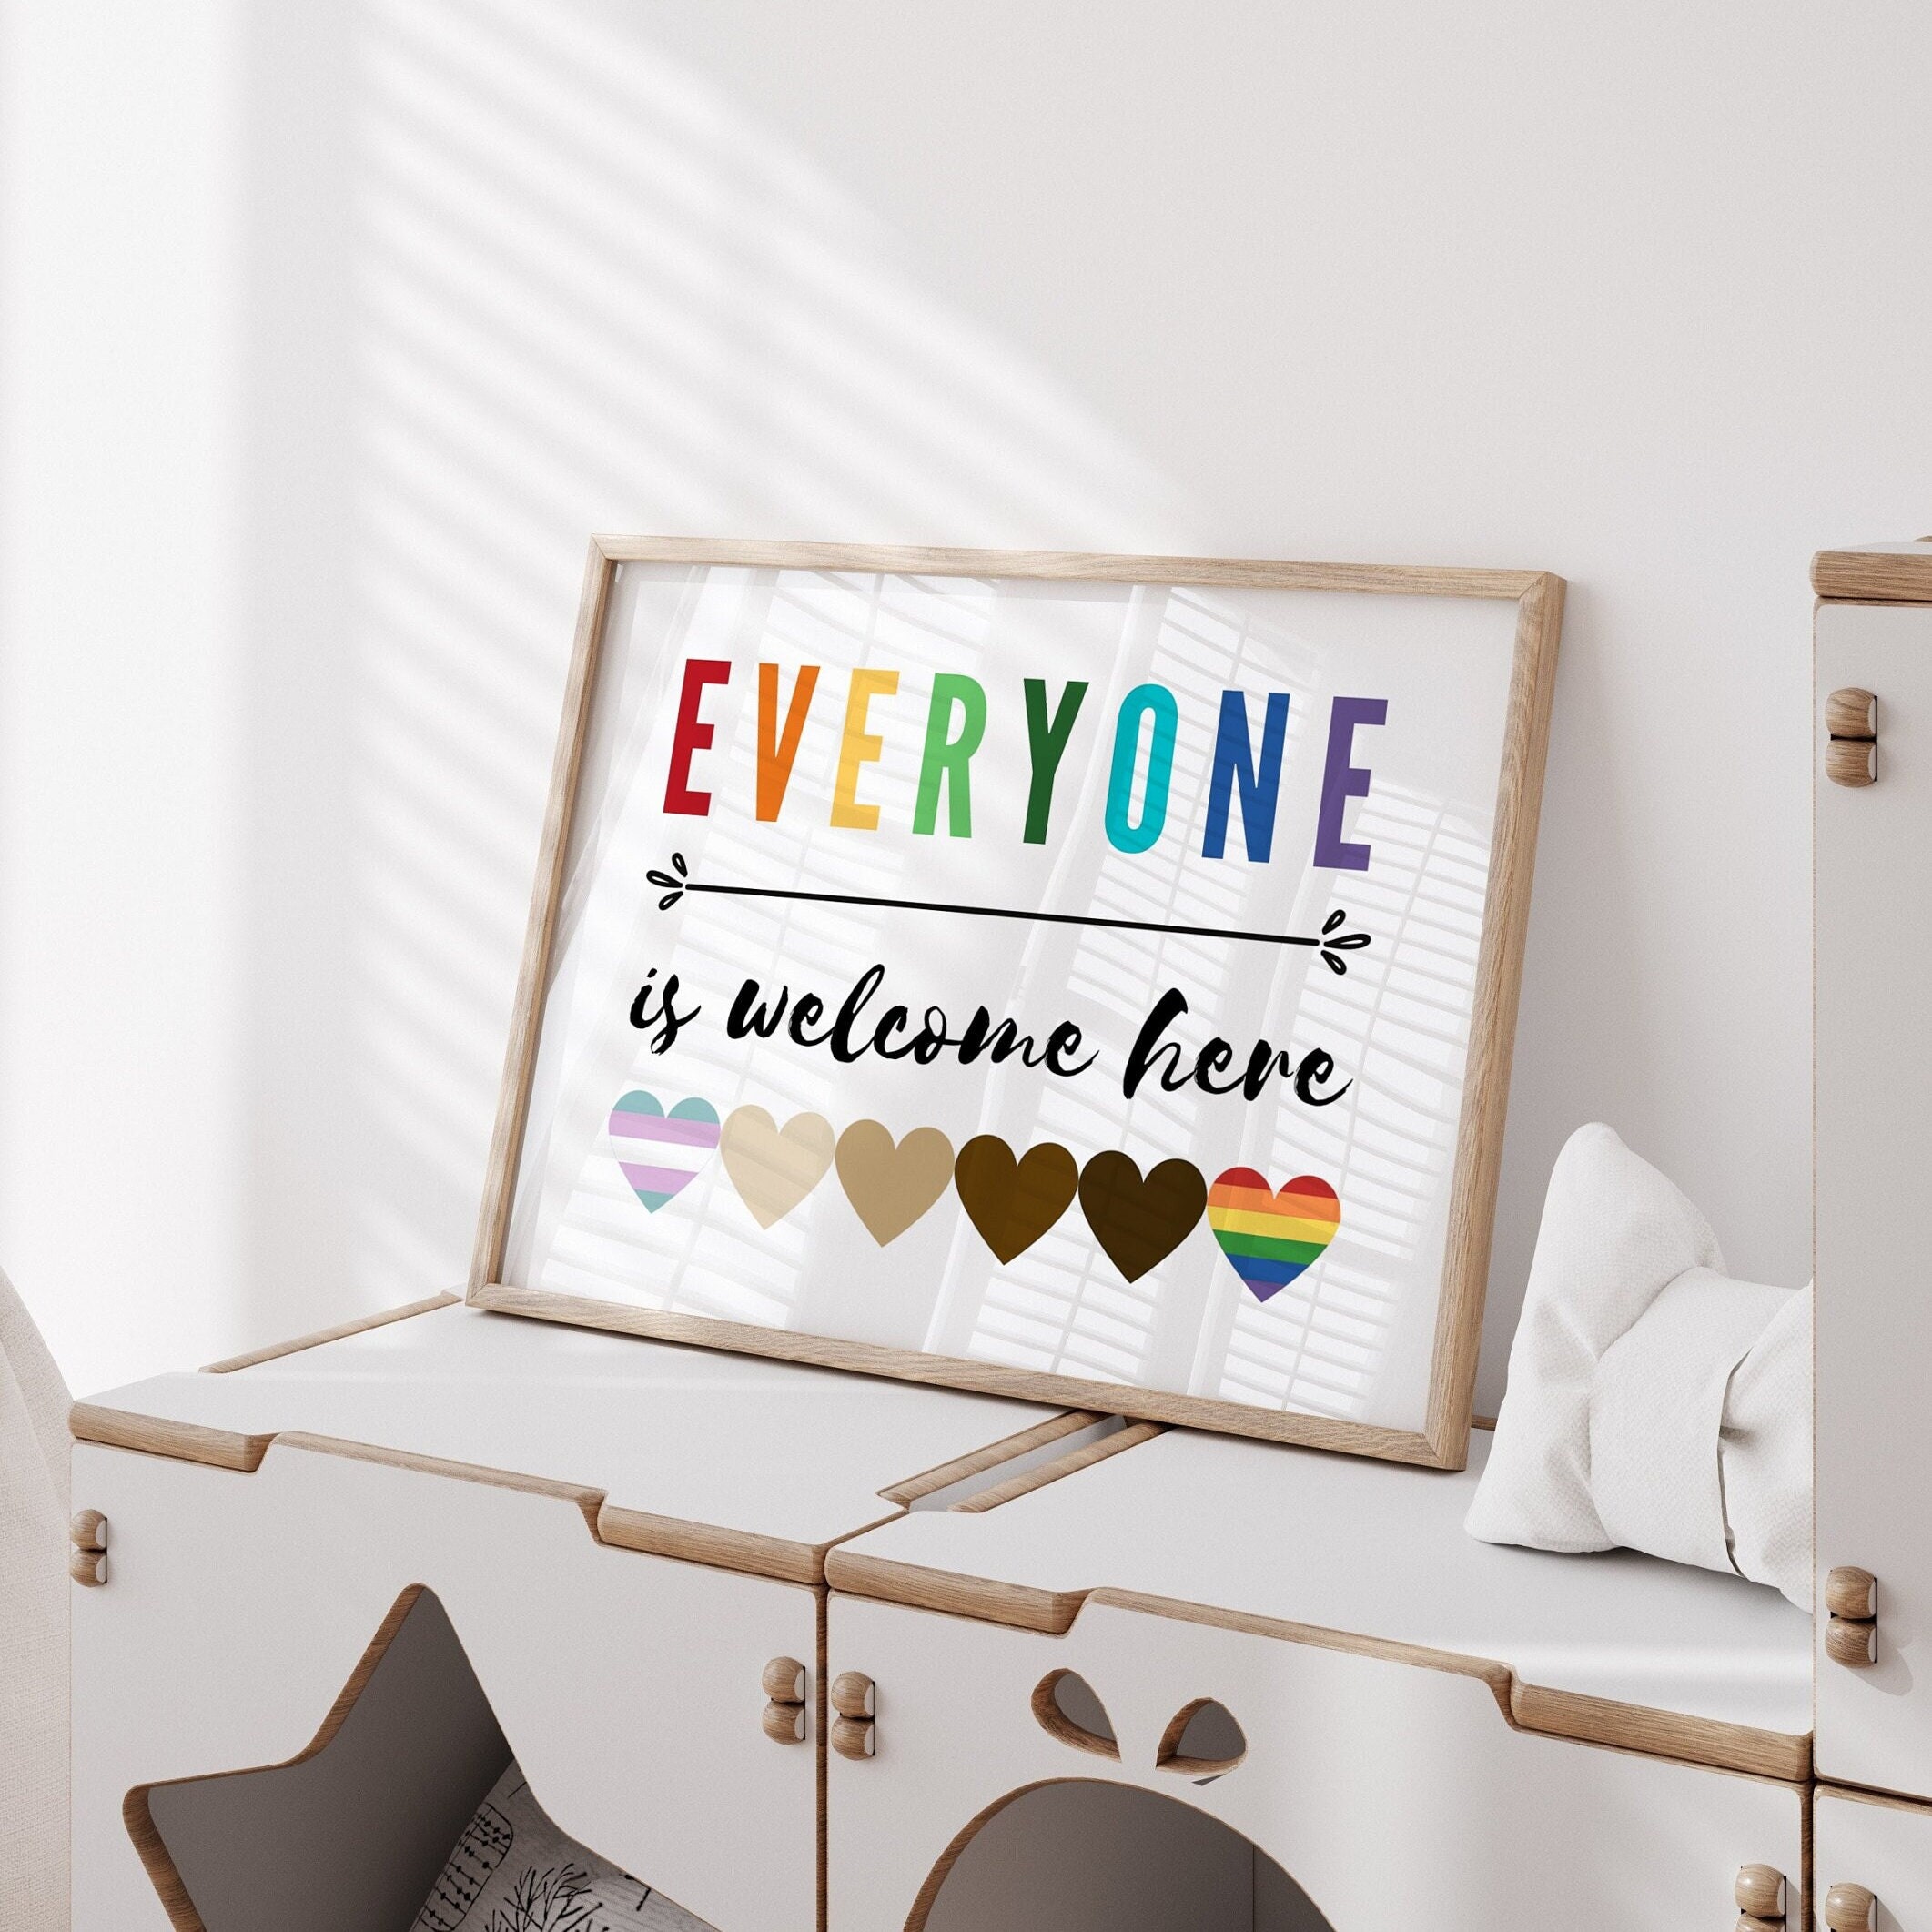 Everyone is Welcome Small Poster Pack